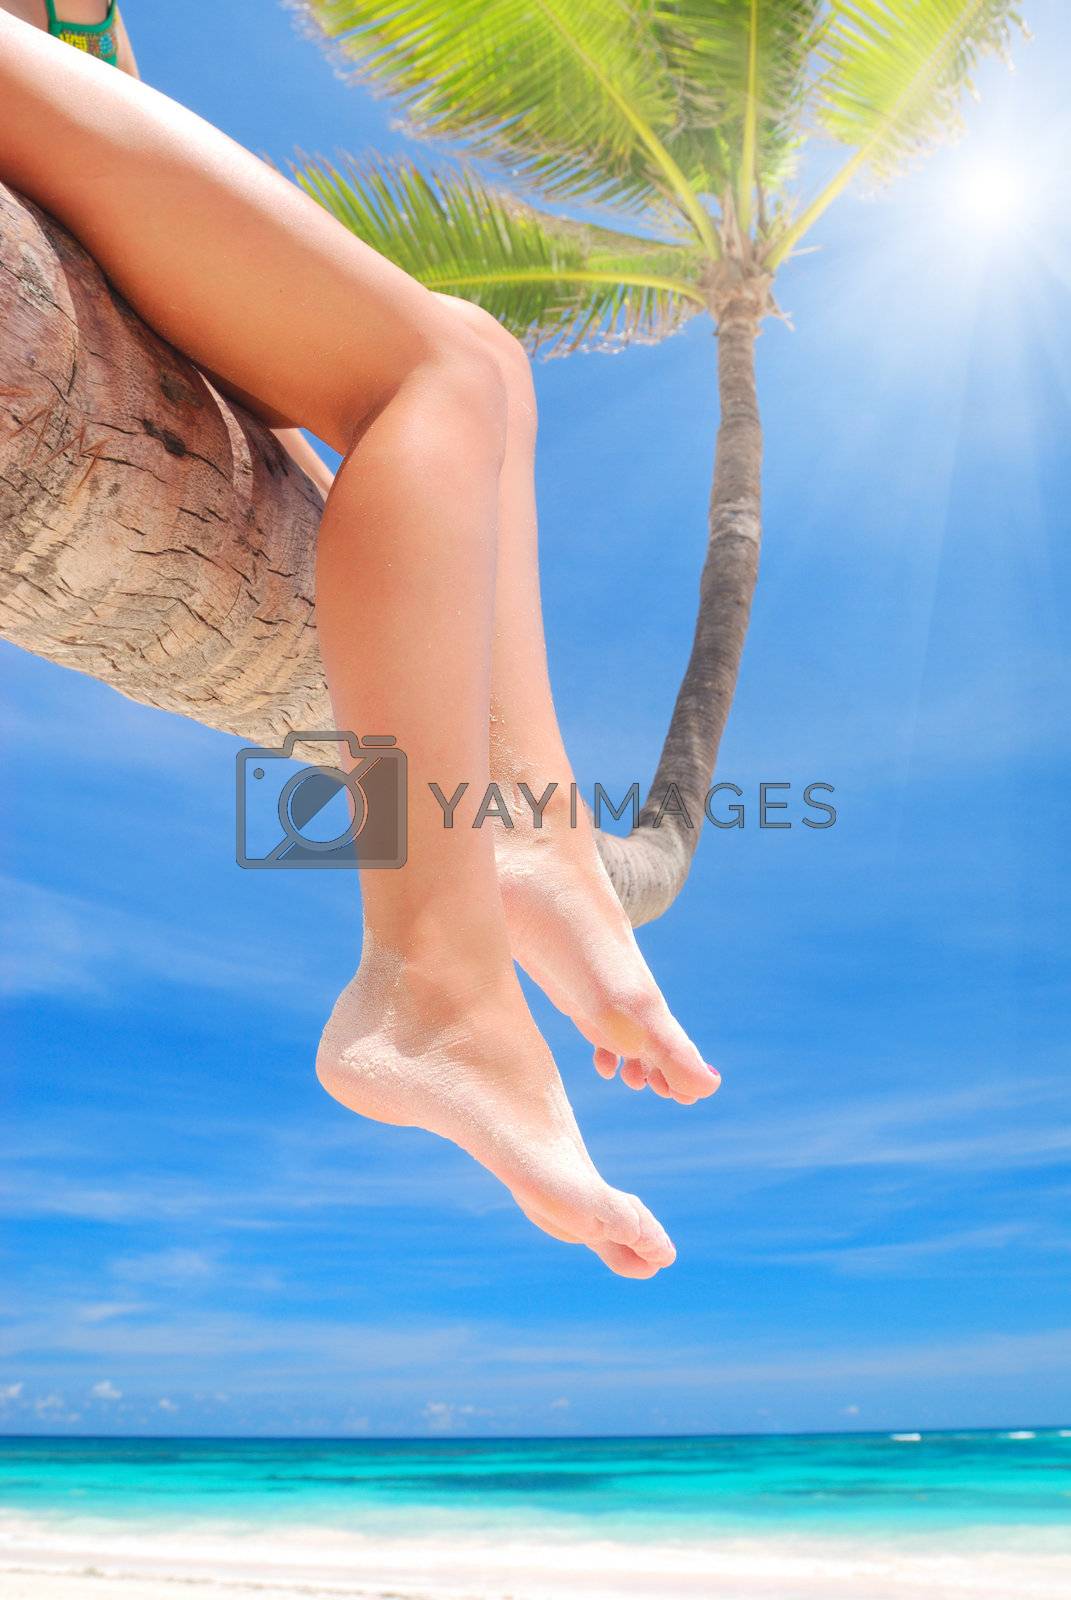 Royalty free image of Relax on palm by haveseen